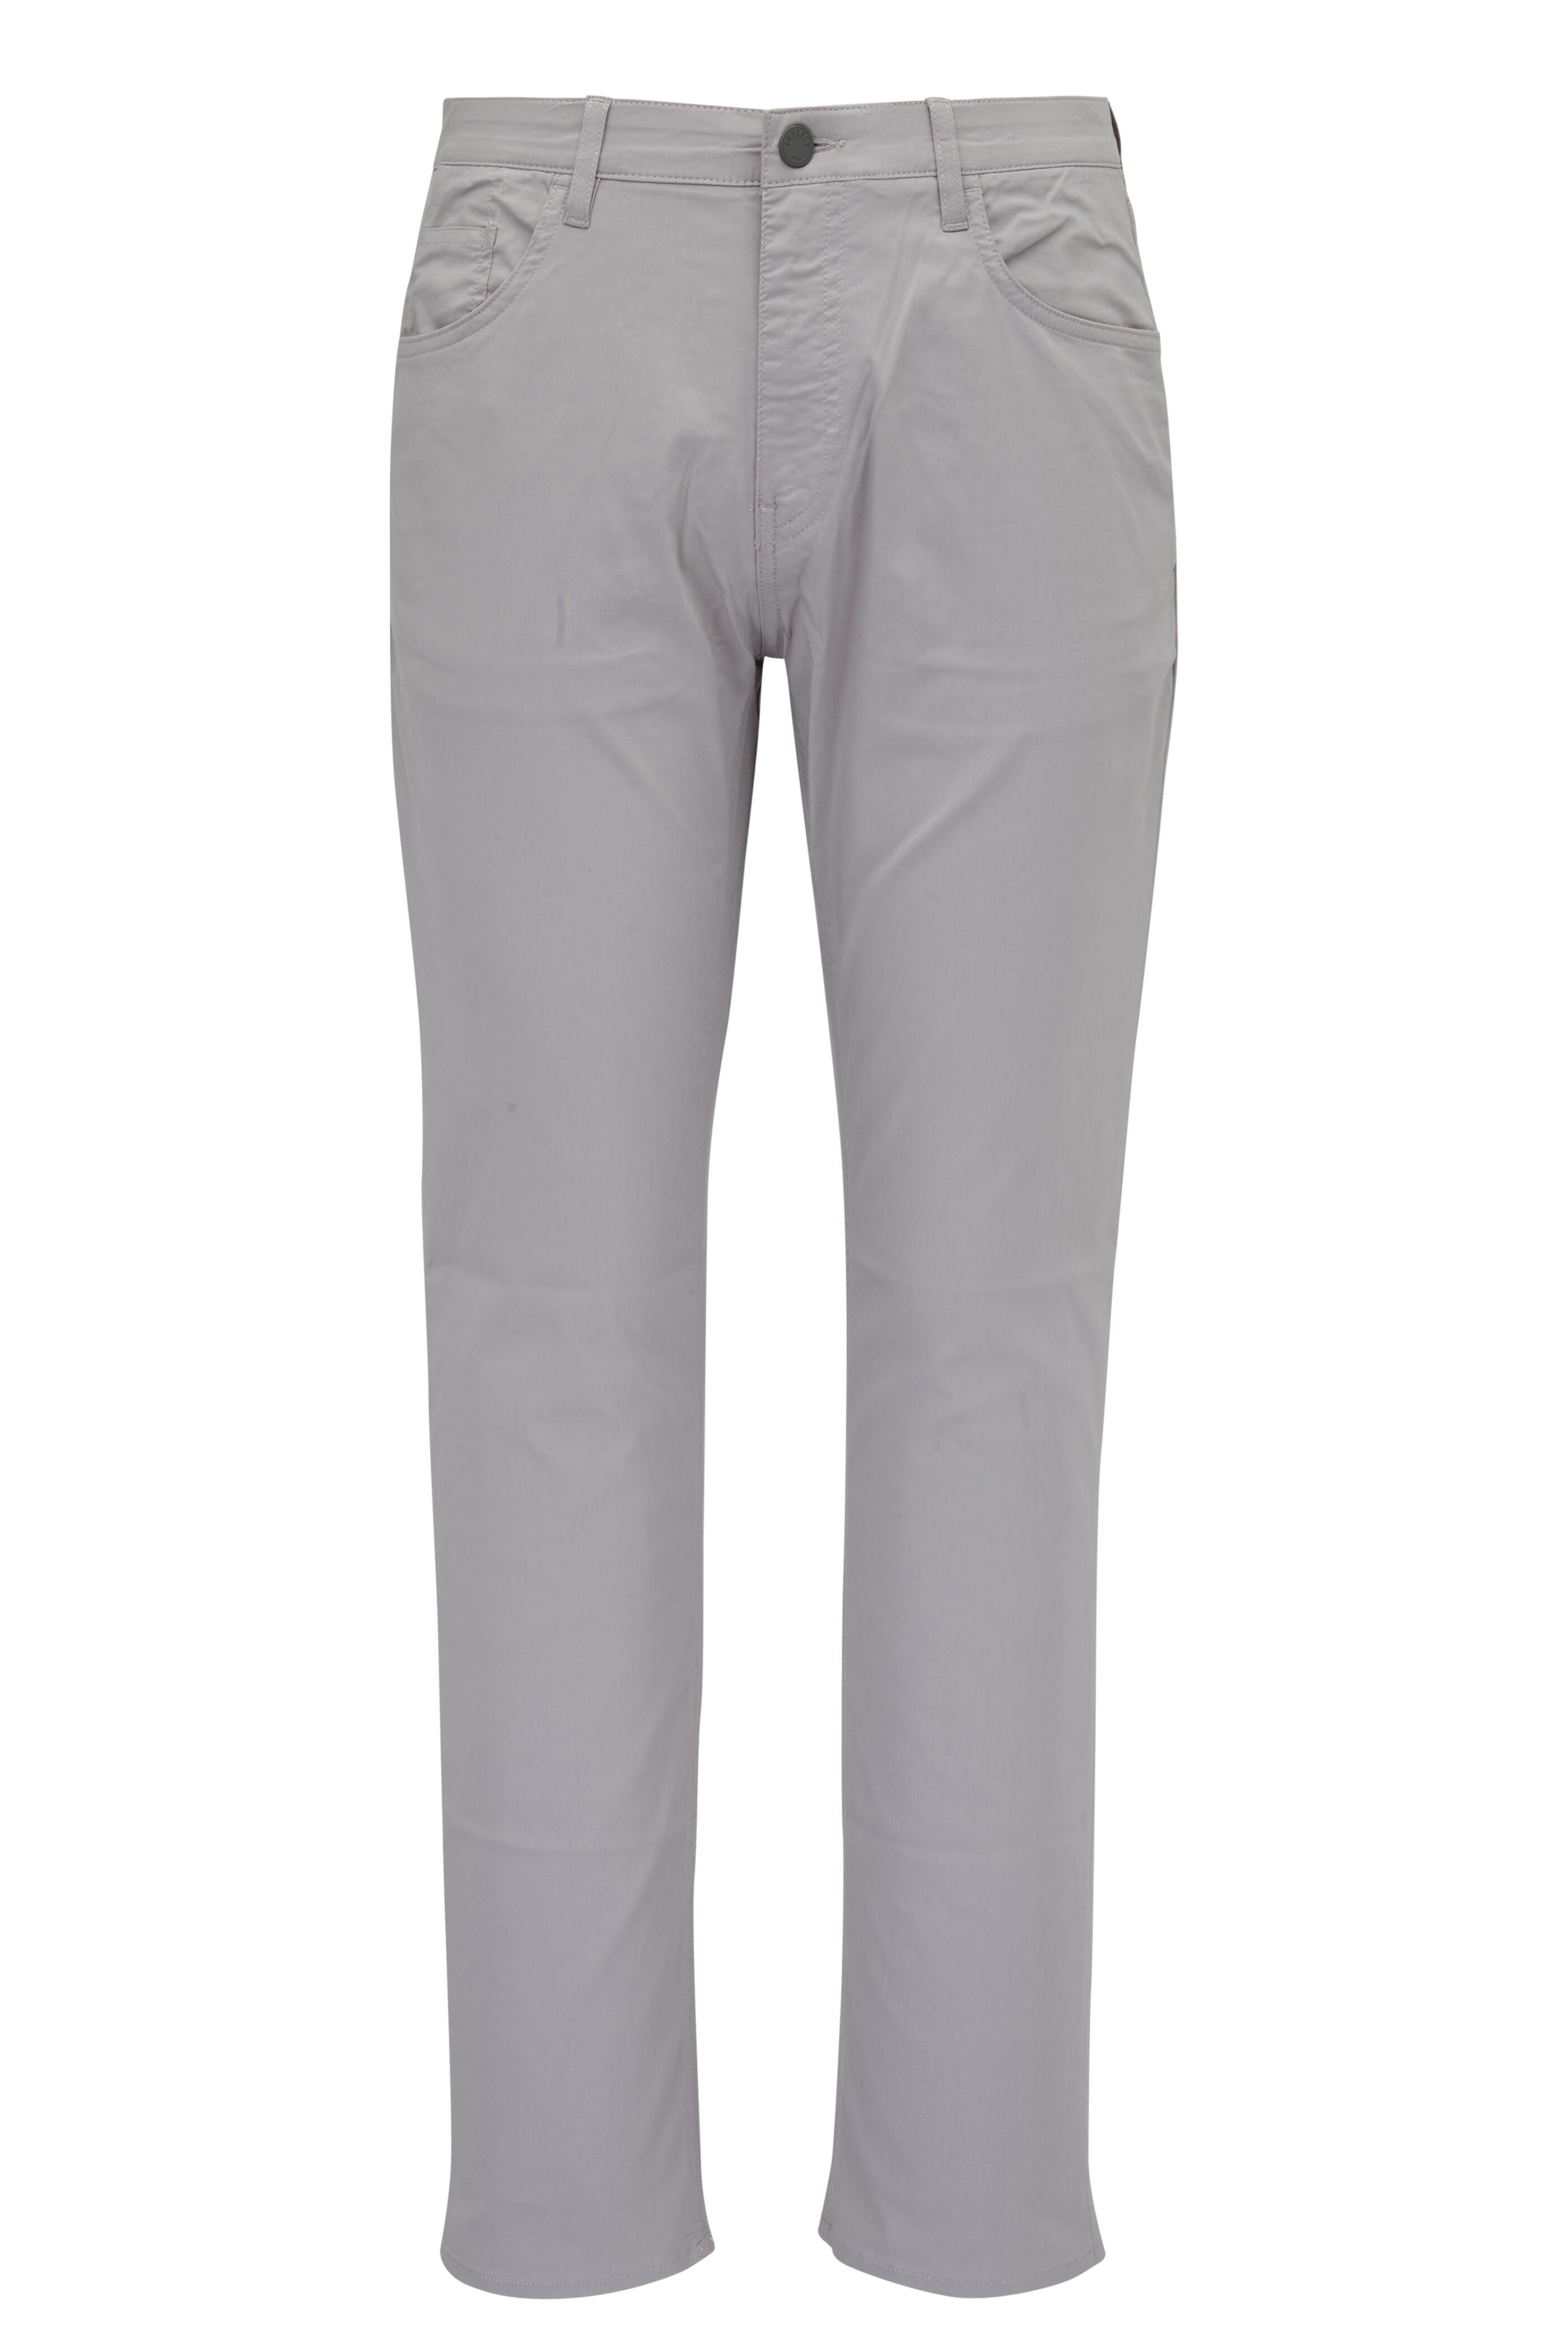 Faherty Brand - Movement™ Fossil Five Pocket Pant